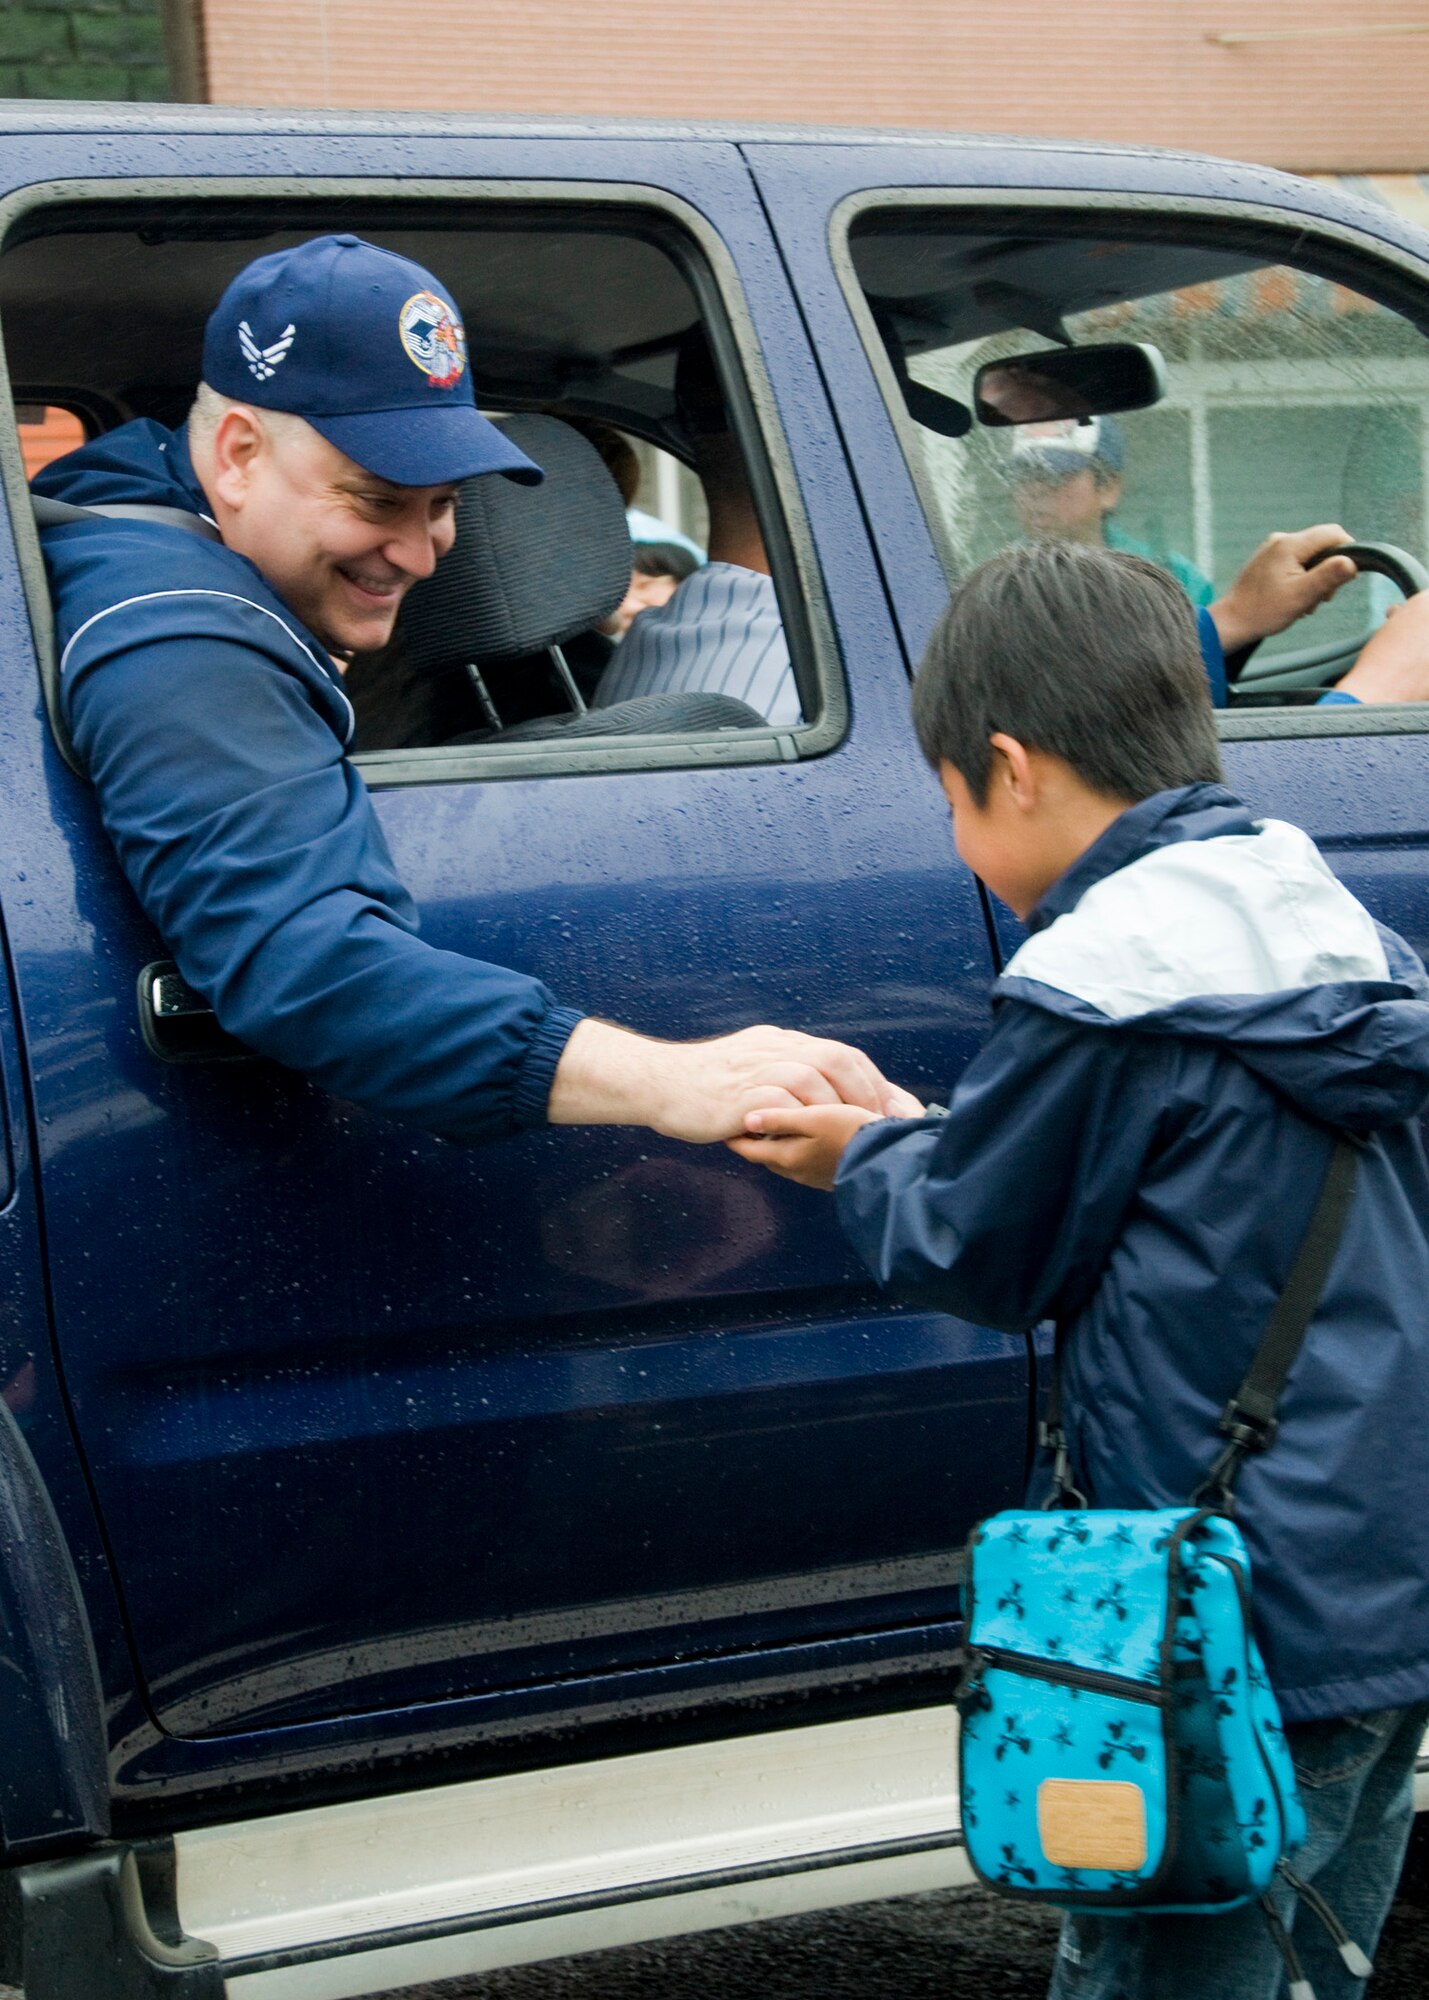 MISAWA AIR BASE, Japan -- Chief Master Sgt. Rick Price, 35th Fighter Wing command chief, hands candy to a child during the American Day parade June 7, 2009. The parade was part of a weekend full of American entertainment and games. (U.S. Air Force photo by Staff Sgt. Araceli Alarcon)
